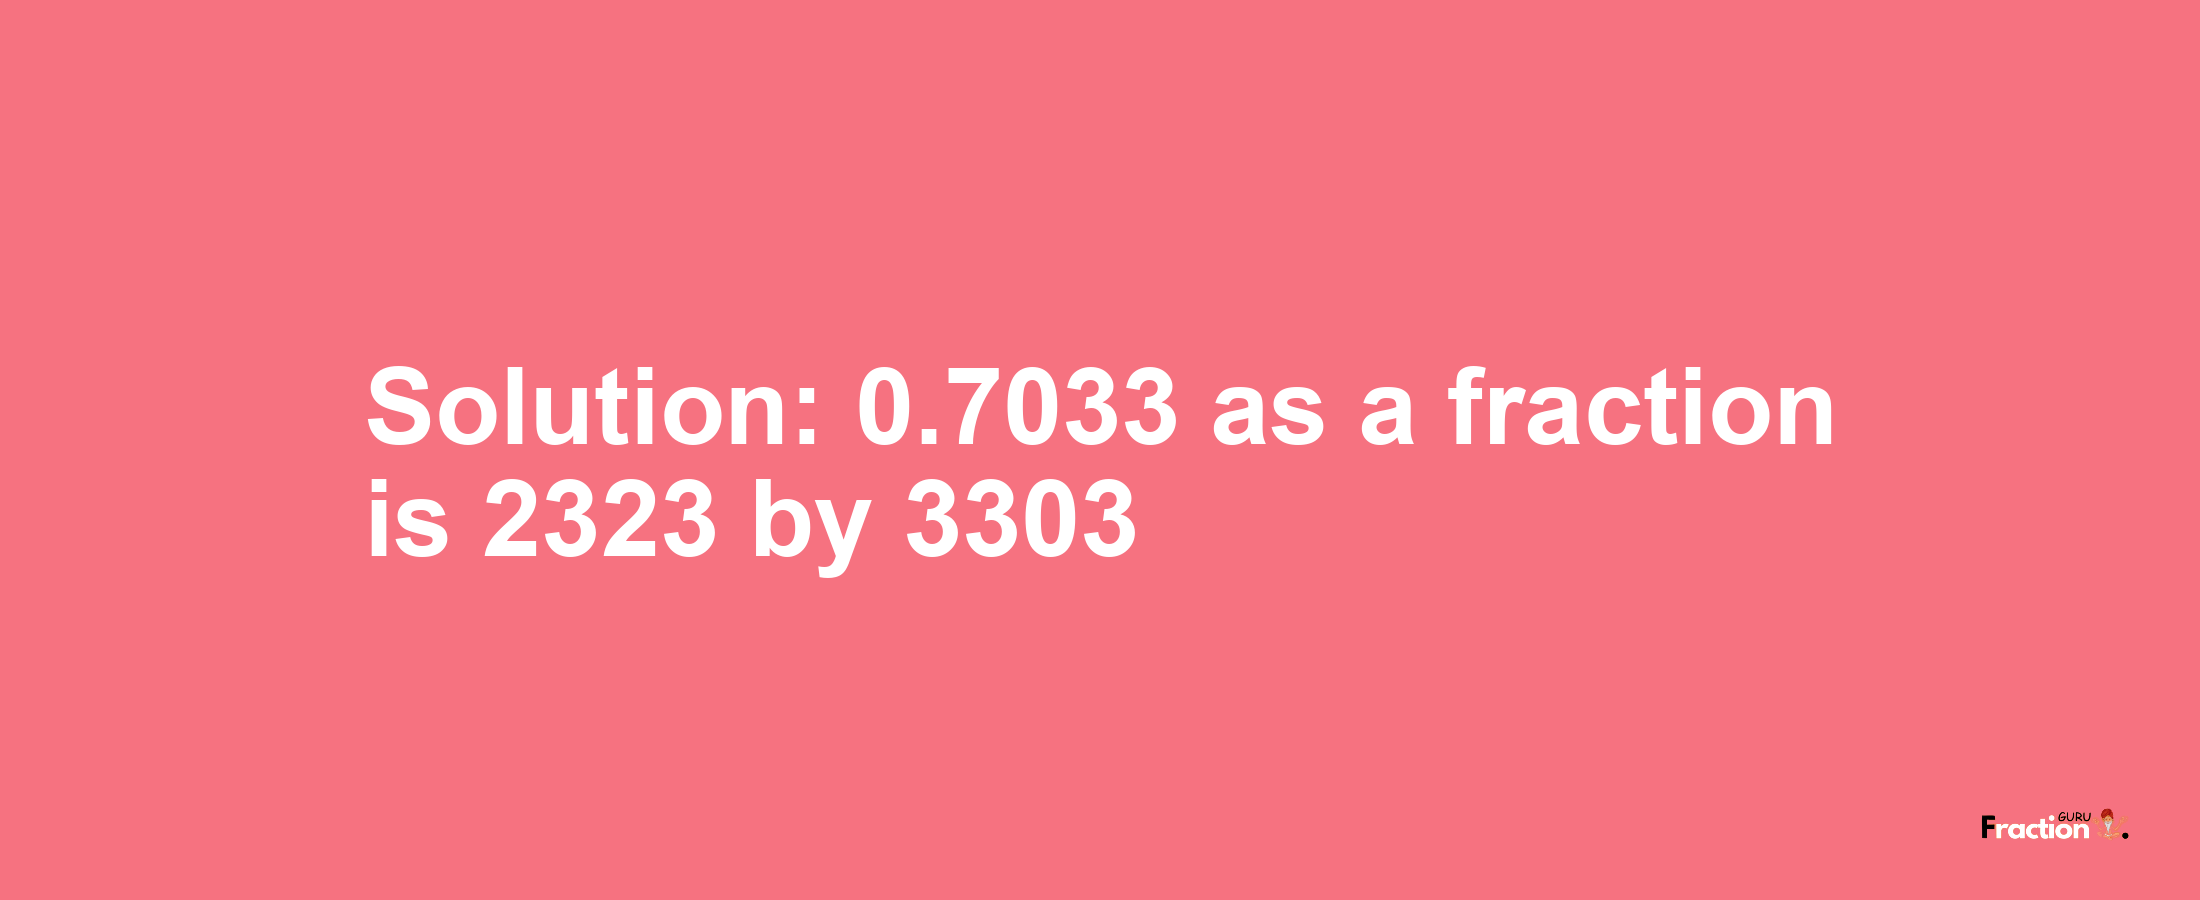 Solution:0.7033 as a fraction is 2323/3303